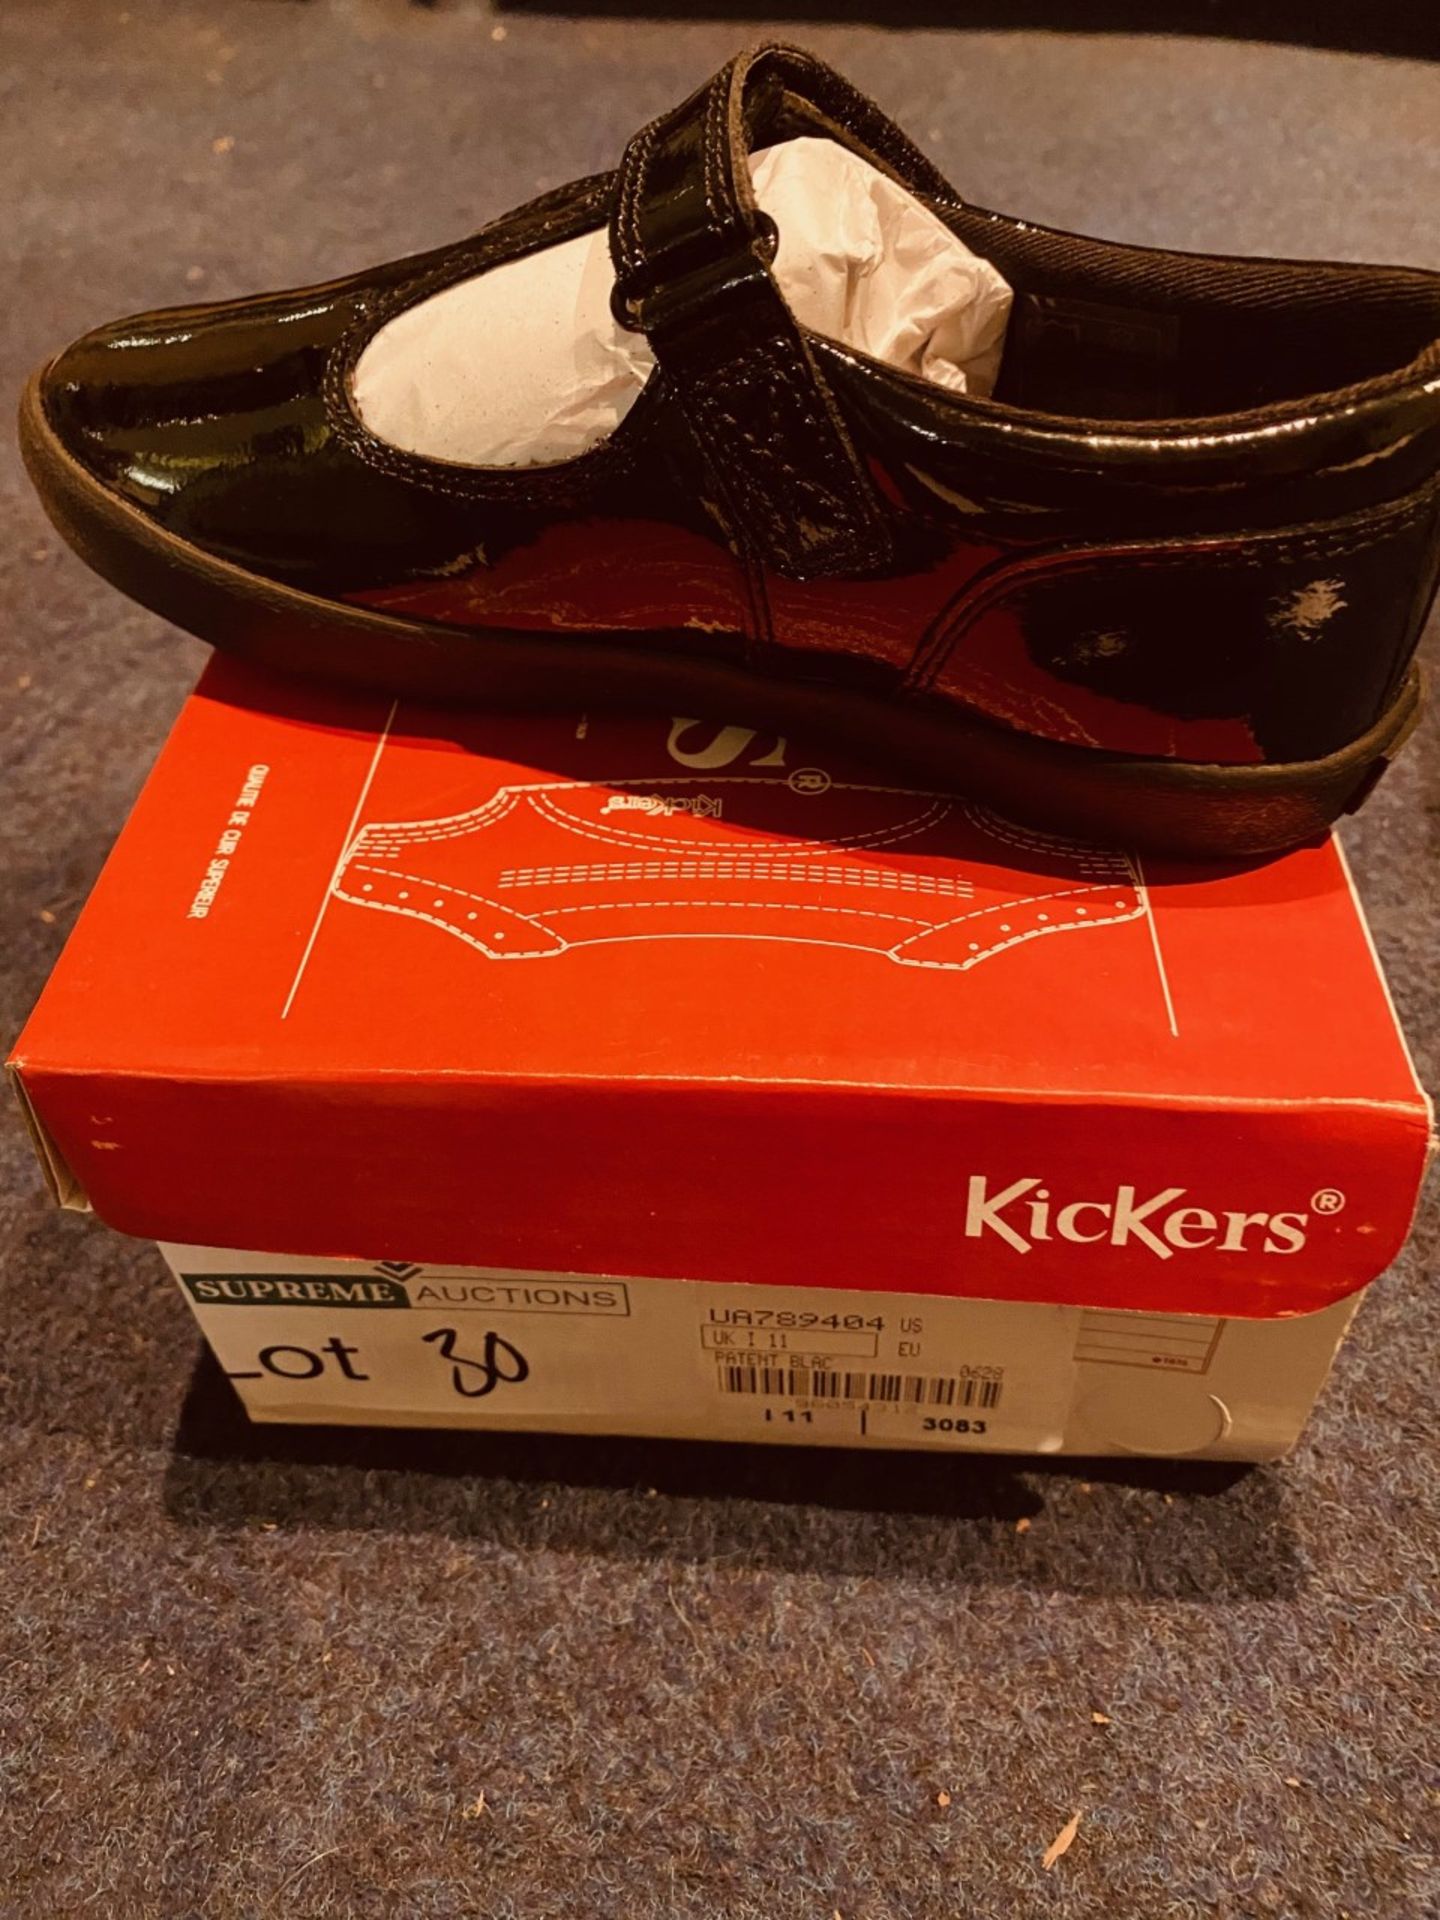 NEW AND BOXED KICKERS PATENT BLACK I-11 - Image 2 of 2